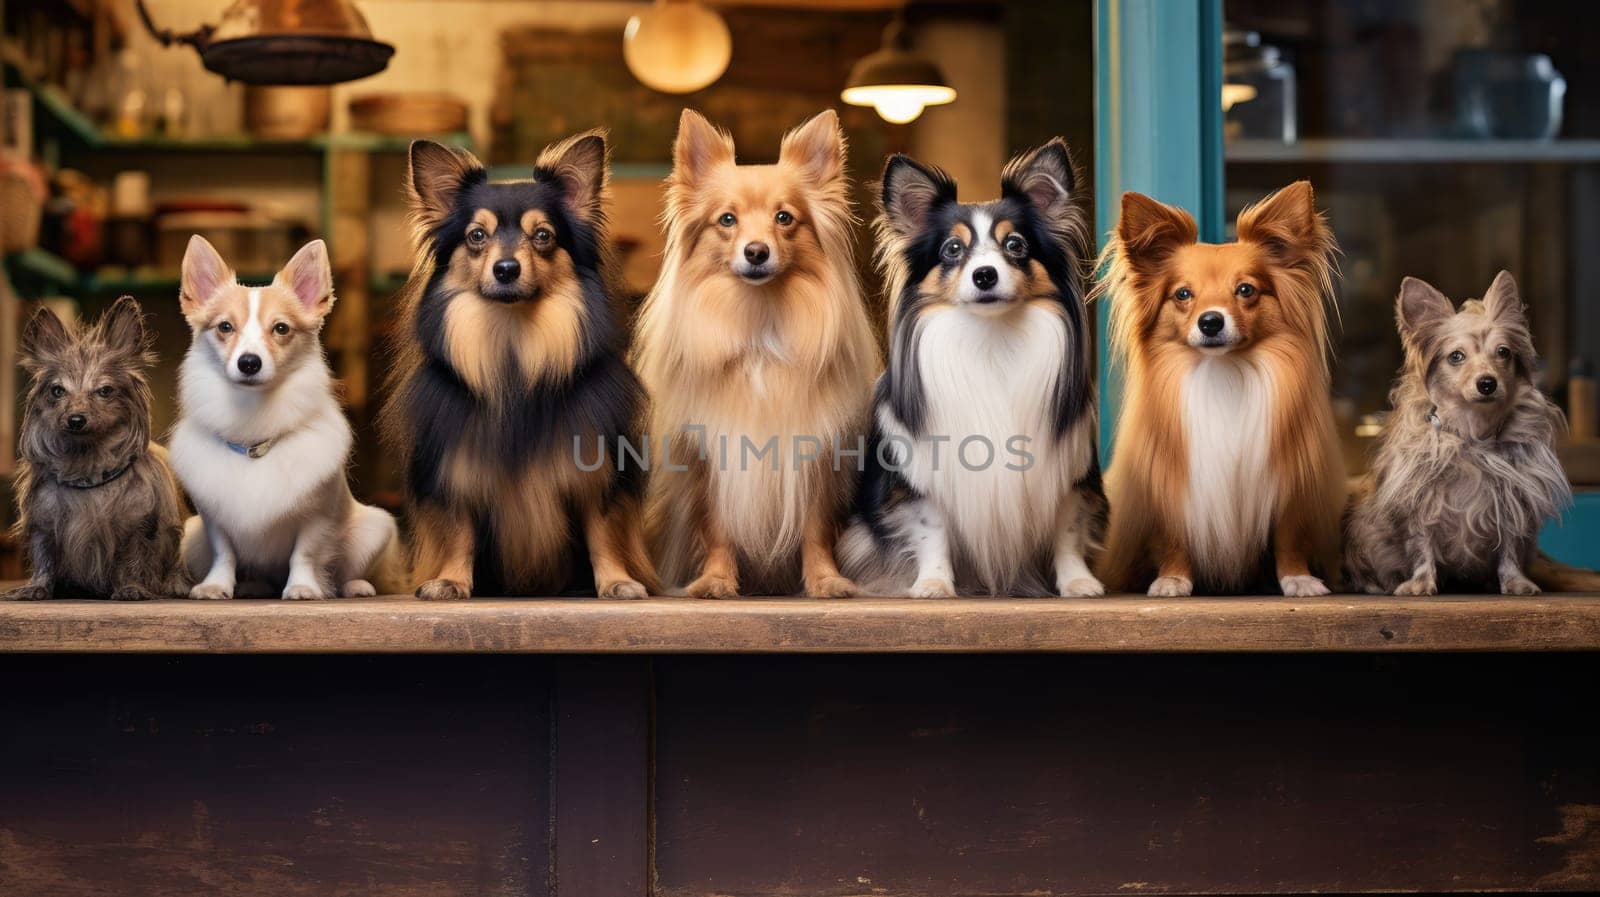 Dogs of different breeds sitting together. Blurred background by natali_brill